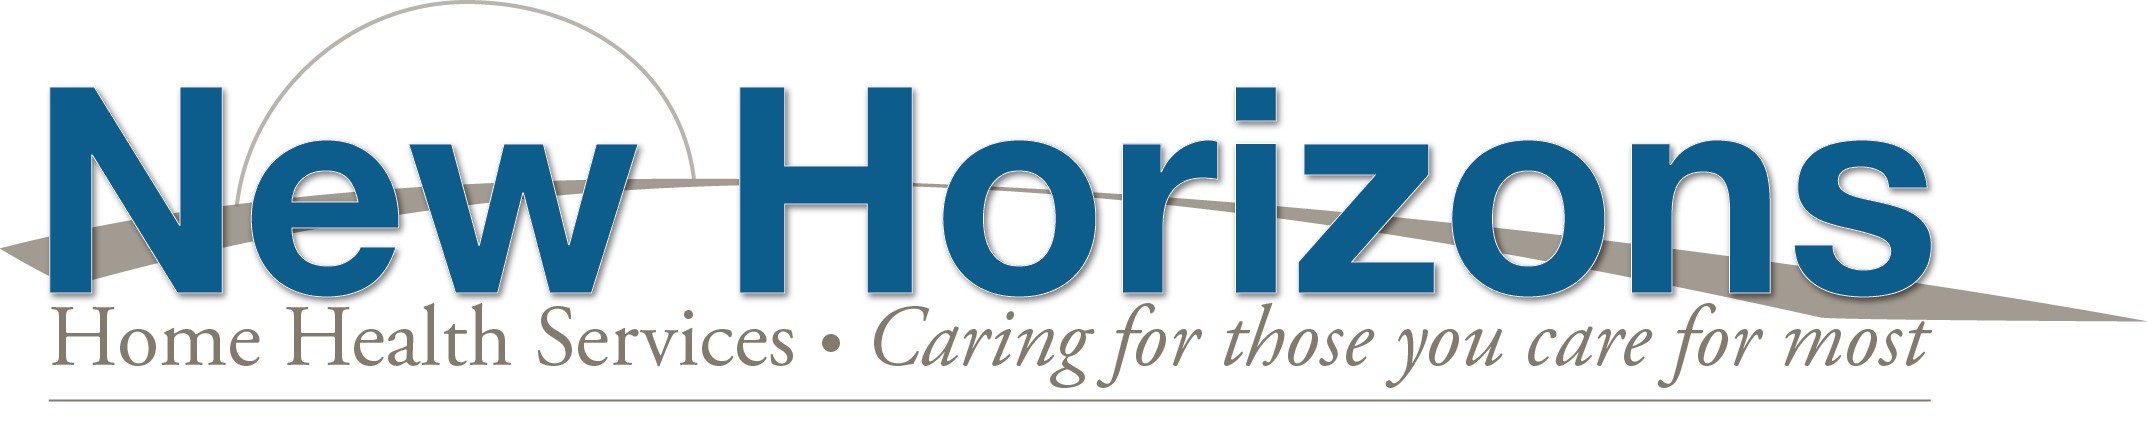 new-horizons-home-health-services-image-1